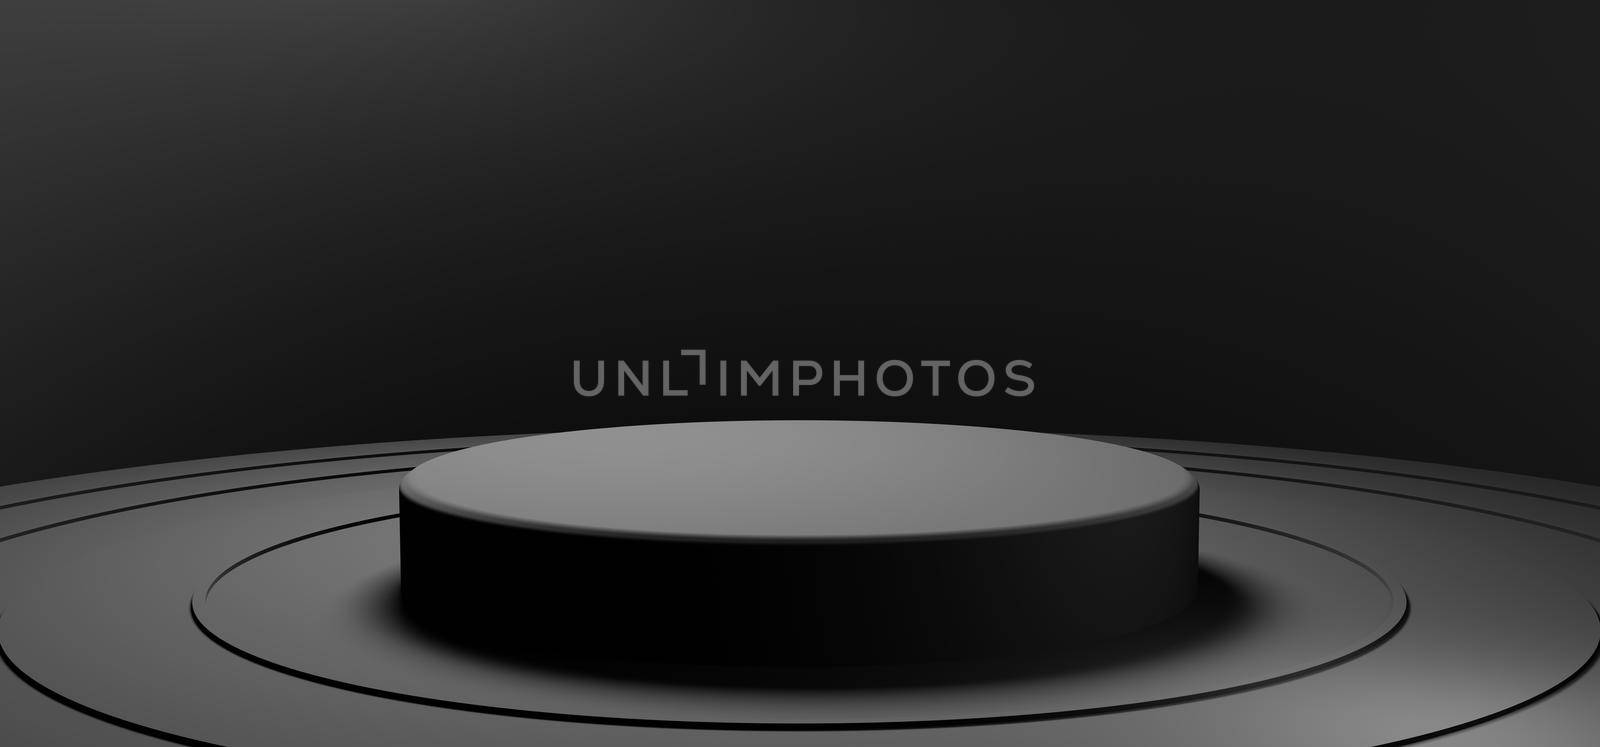 Minimal black round product podium showcase stage on circular background. Abstract object and business advertising concept. 3D illustration rendering